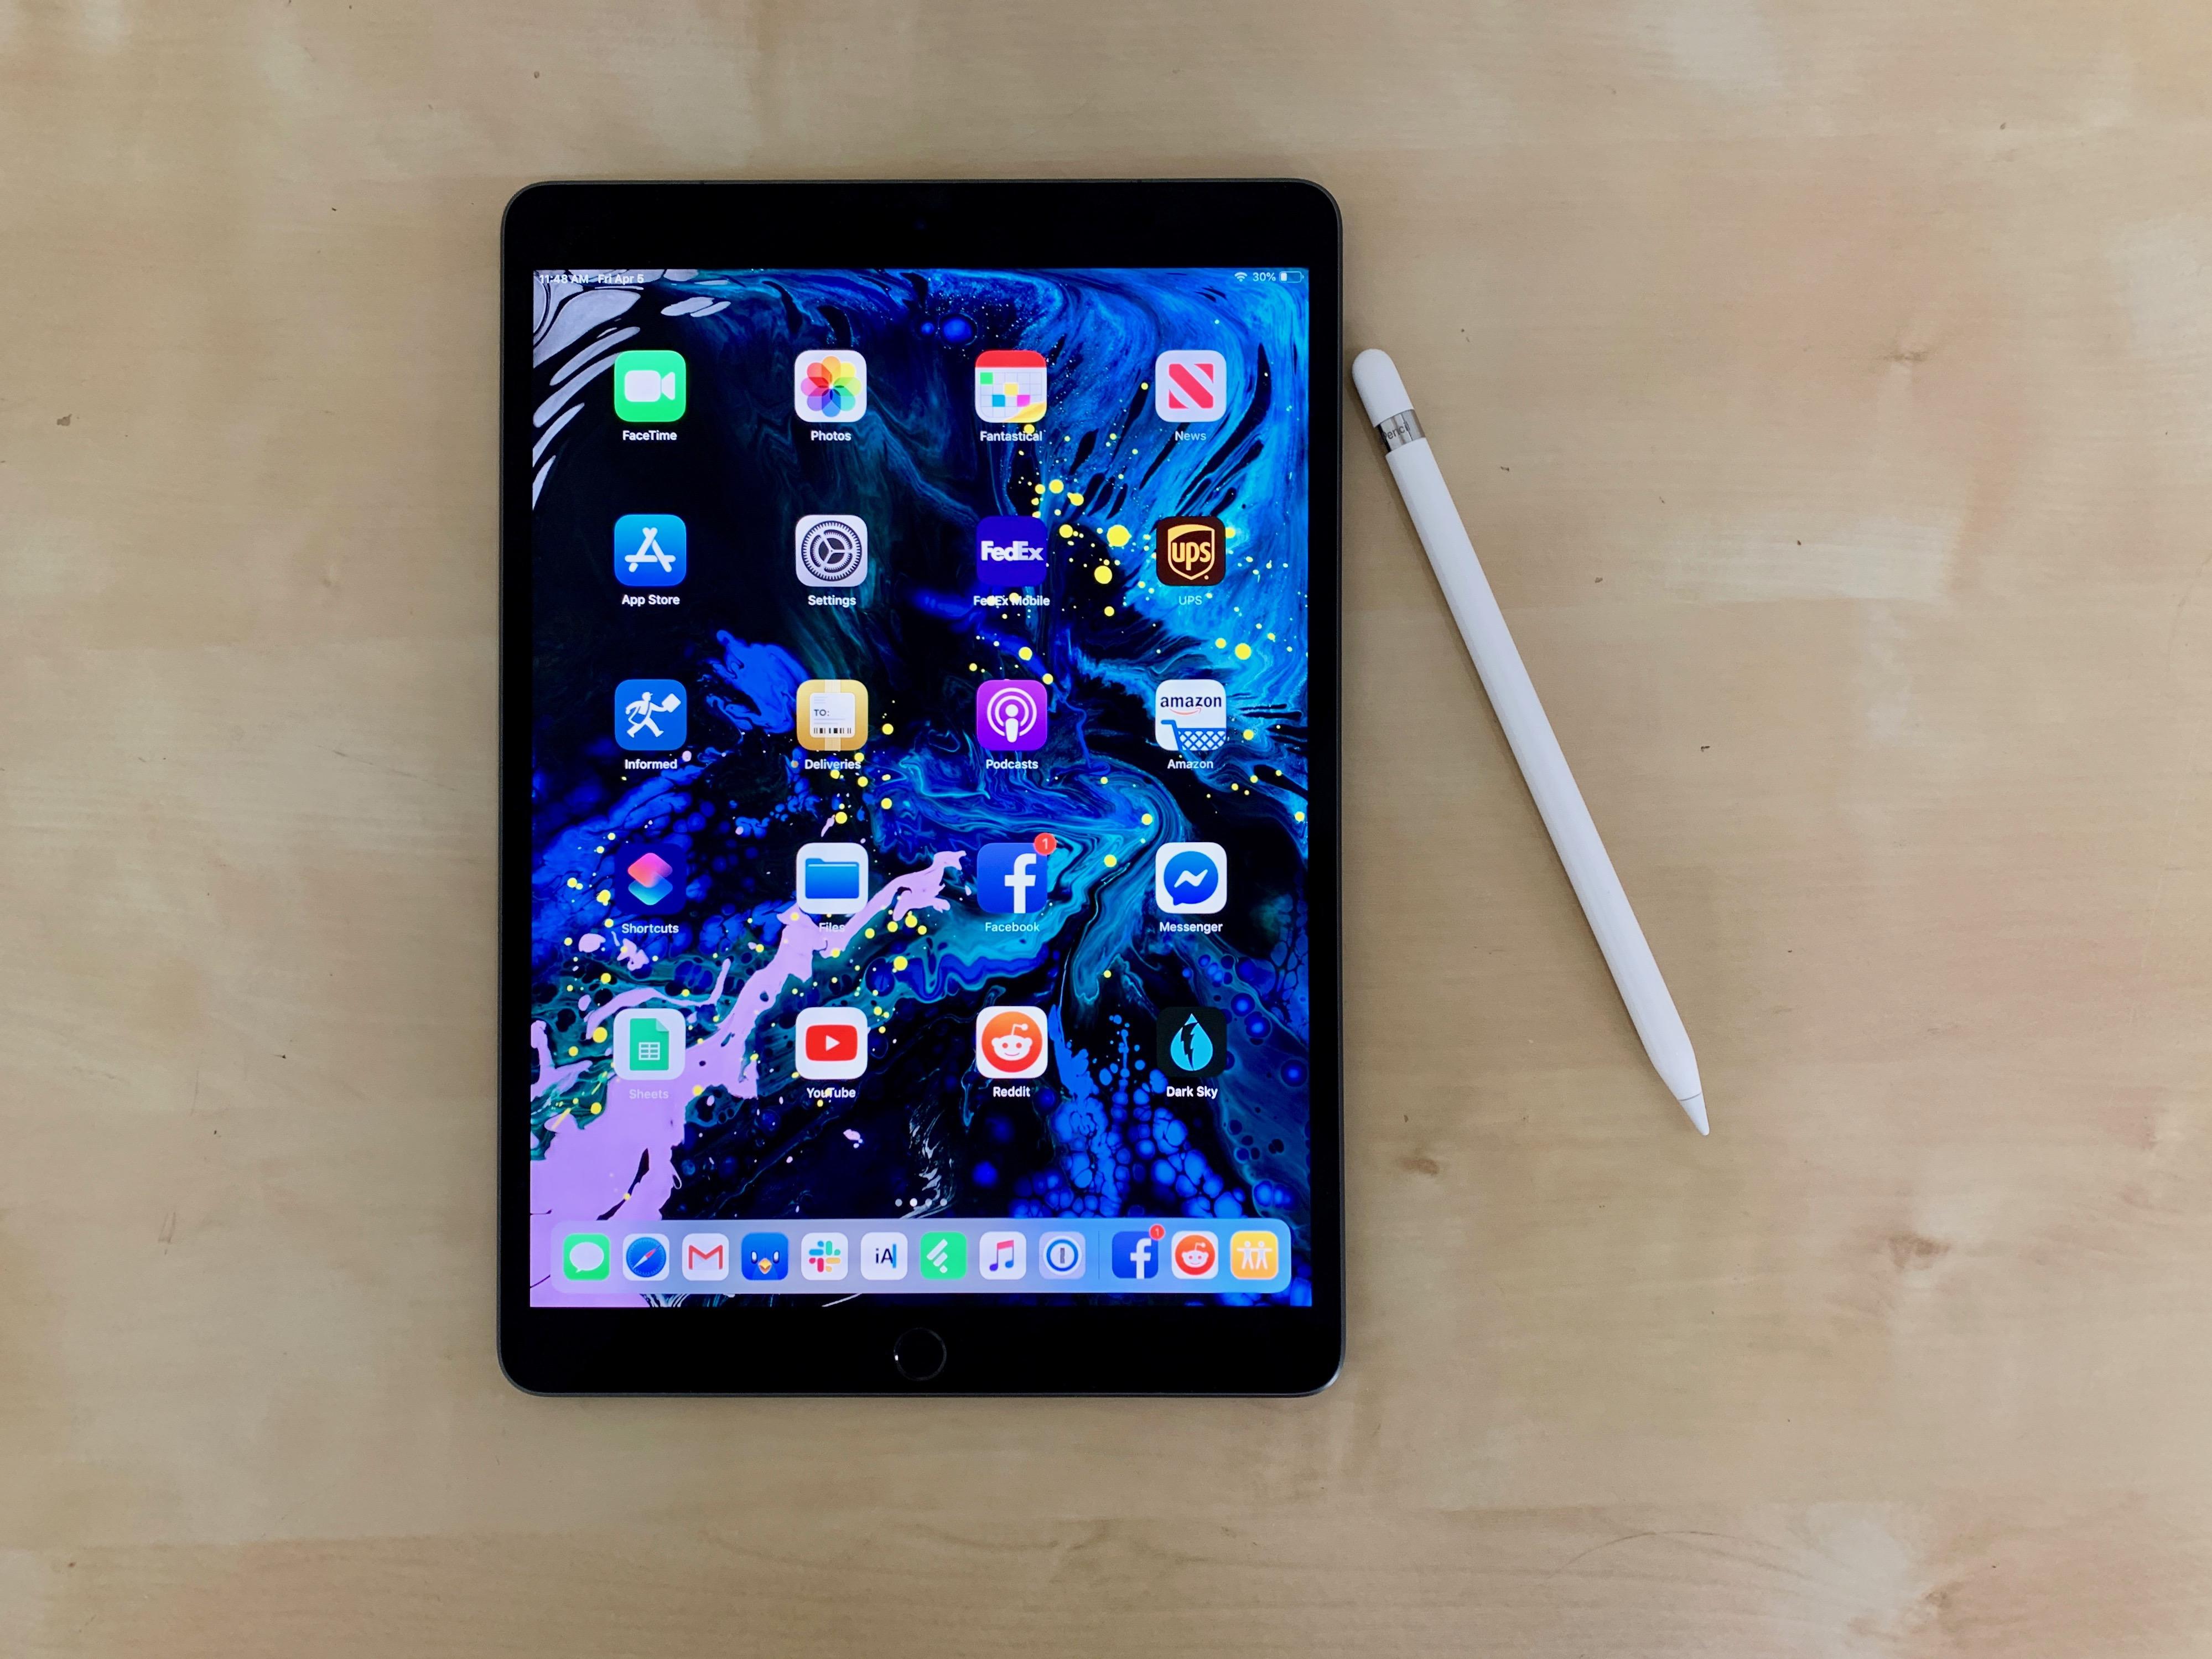 iPad Air (2019) review: Apple's newest tablet combines